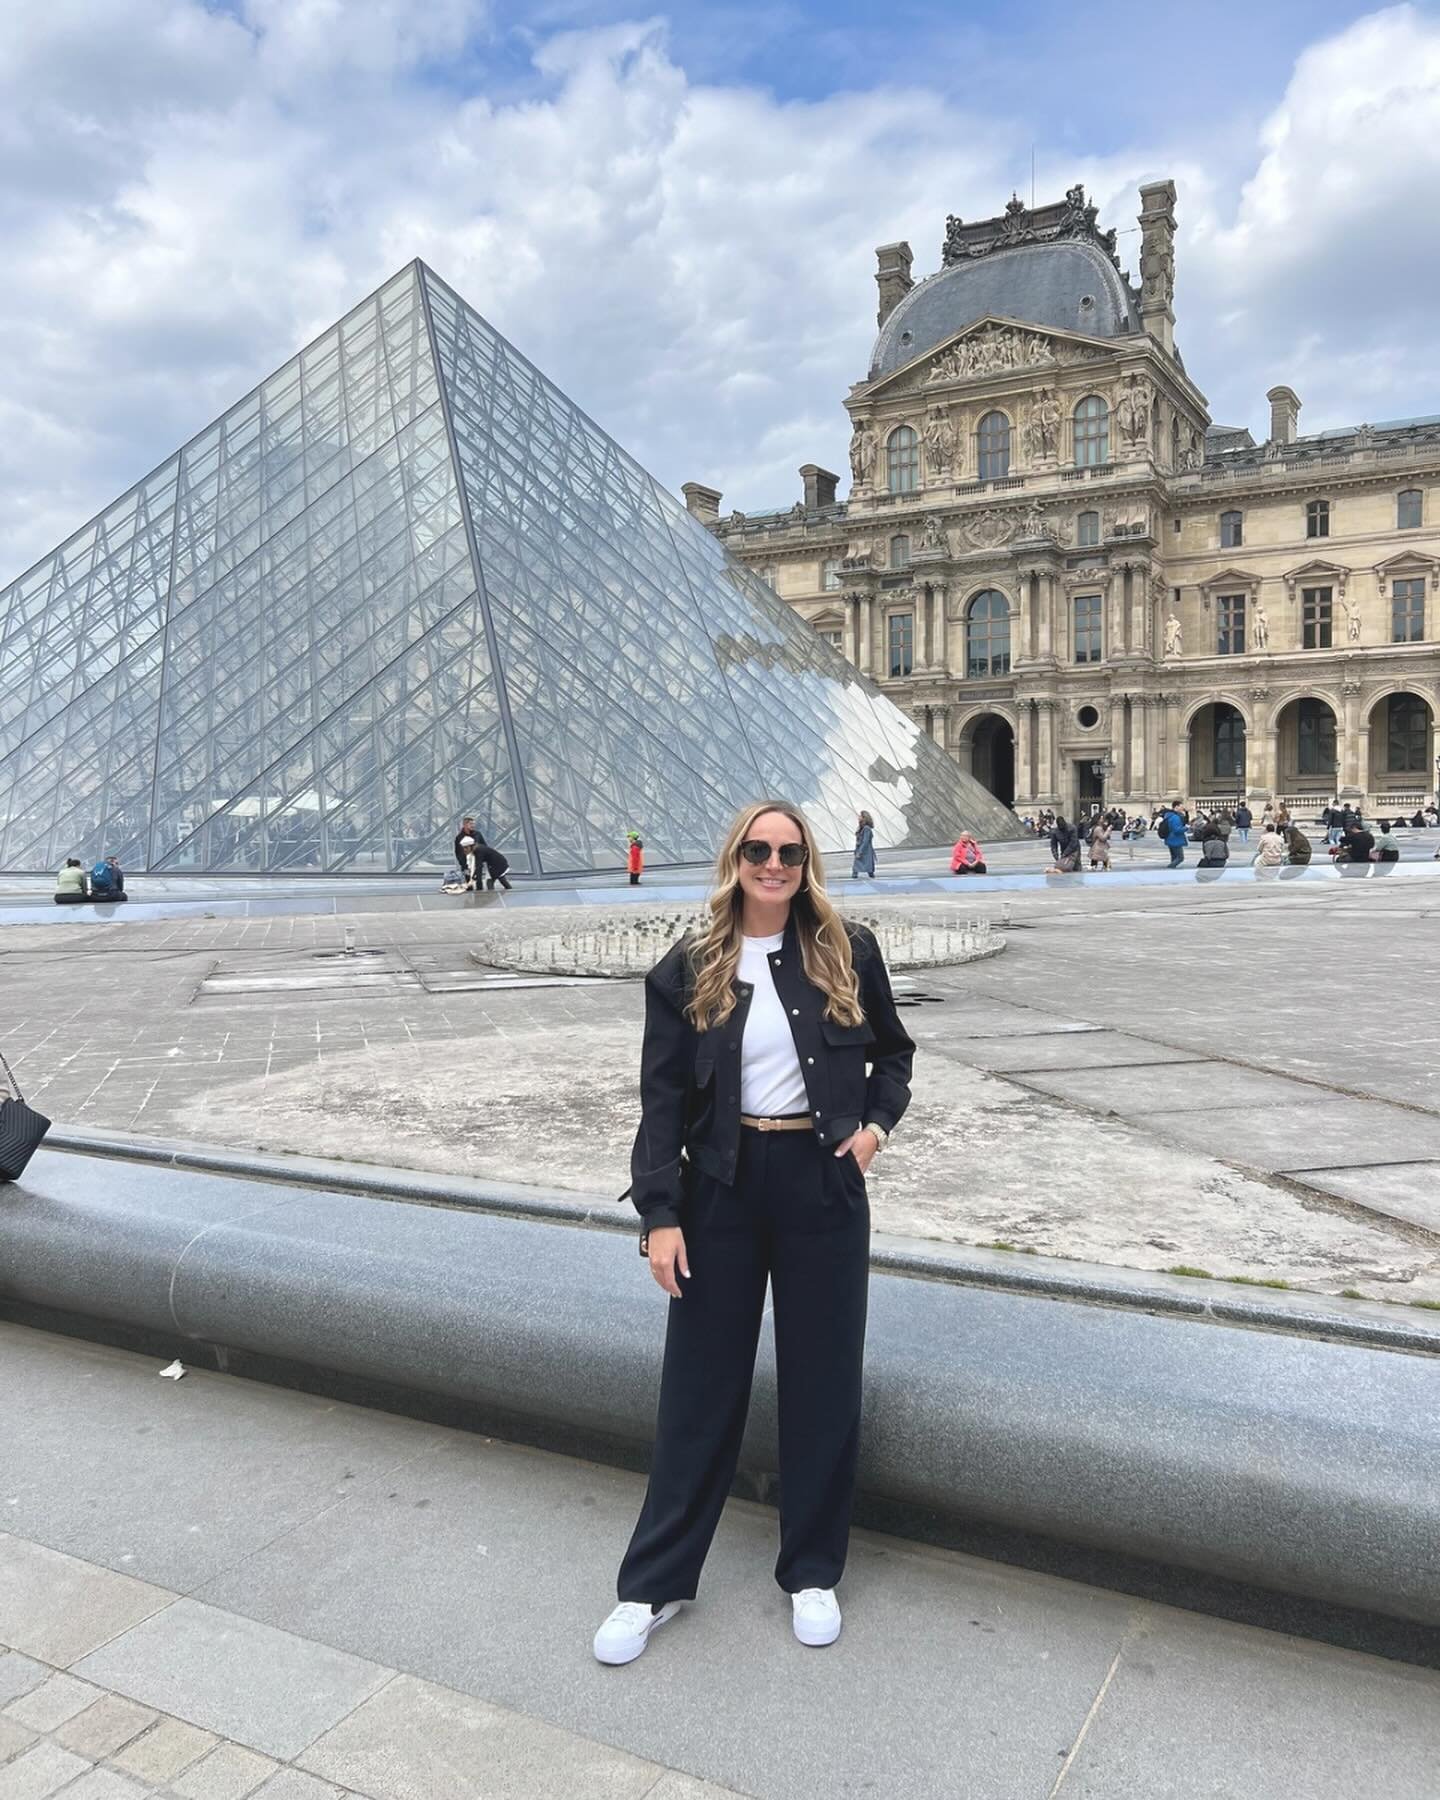 🥐✨ Ansley in Paris! While Emily might have the drama, our Ansley&rsquo;s got the down-low on all things luxe in the City of Light. From secret menu items at the top bistros to the coziest corners in Parisian hotels, she&rsquo;s gathering all the inf